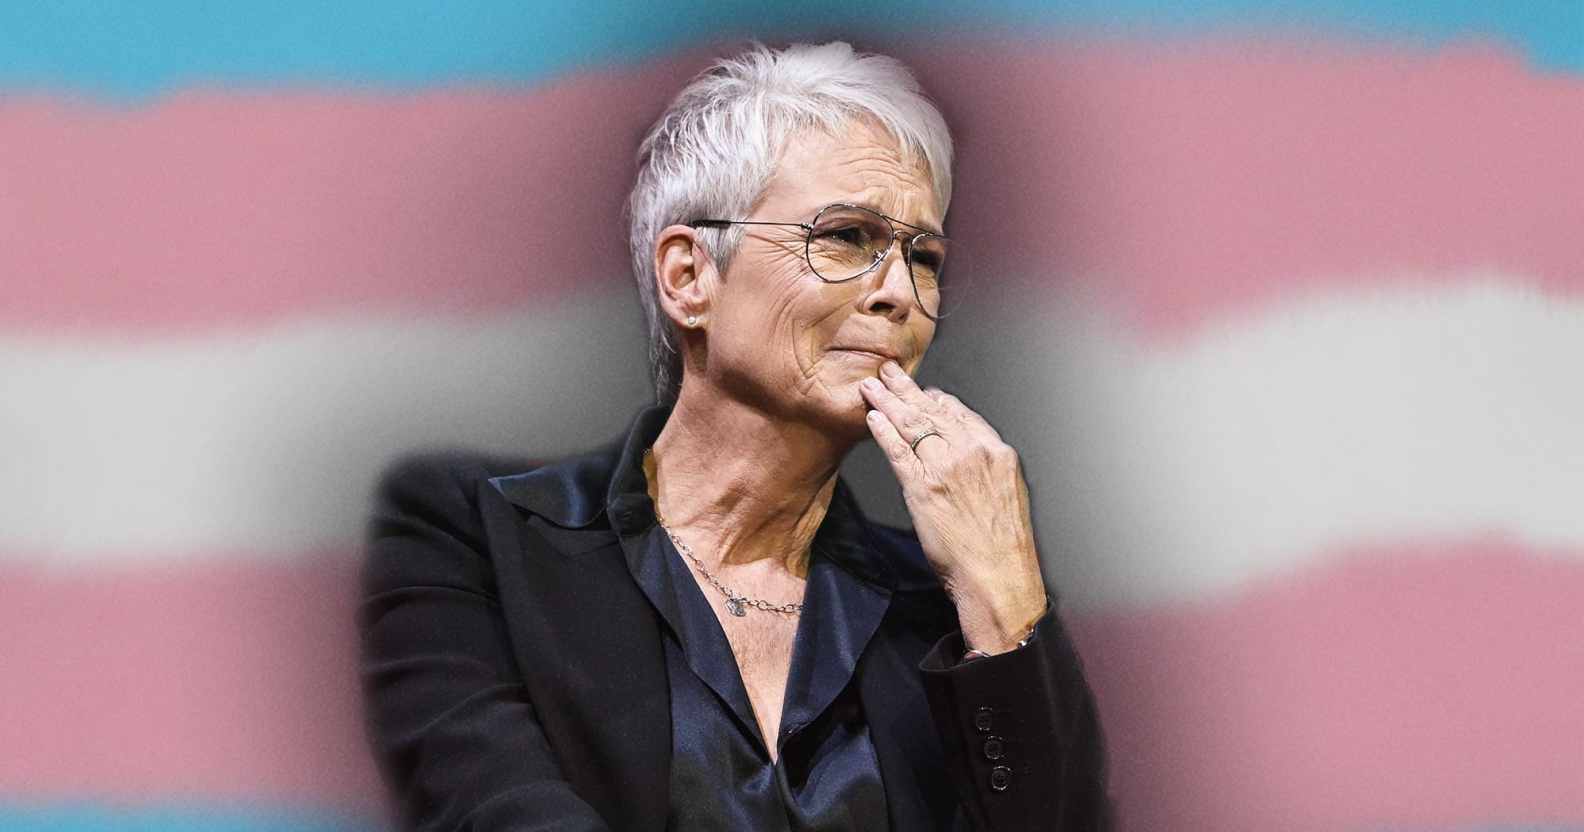 Scream queen Jamie Lee Curtis 'scared' by anti-trans hate